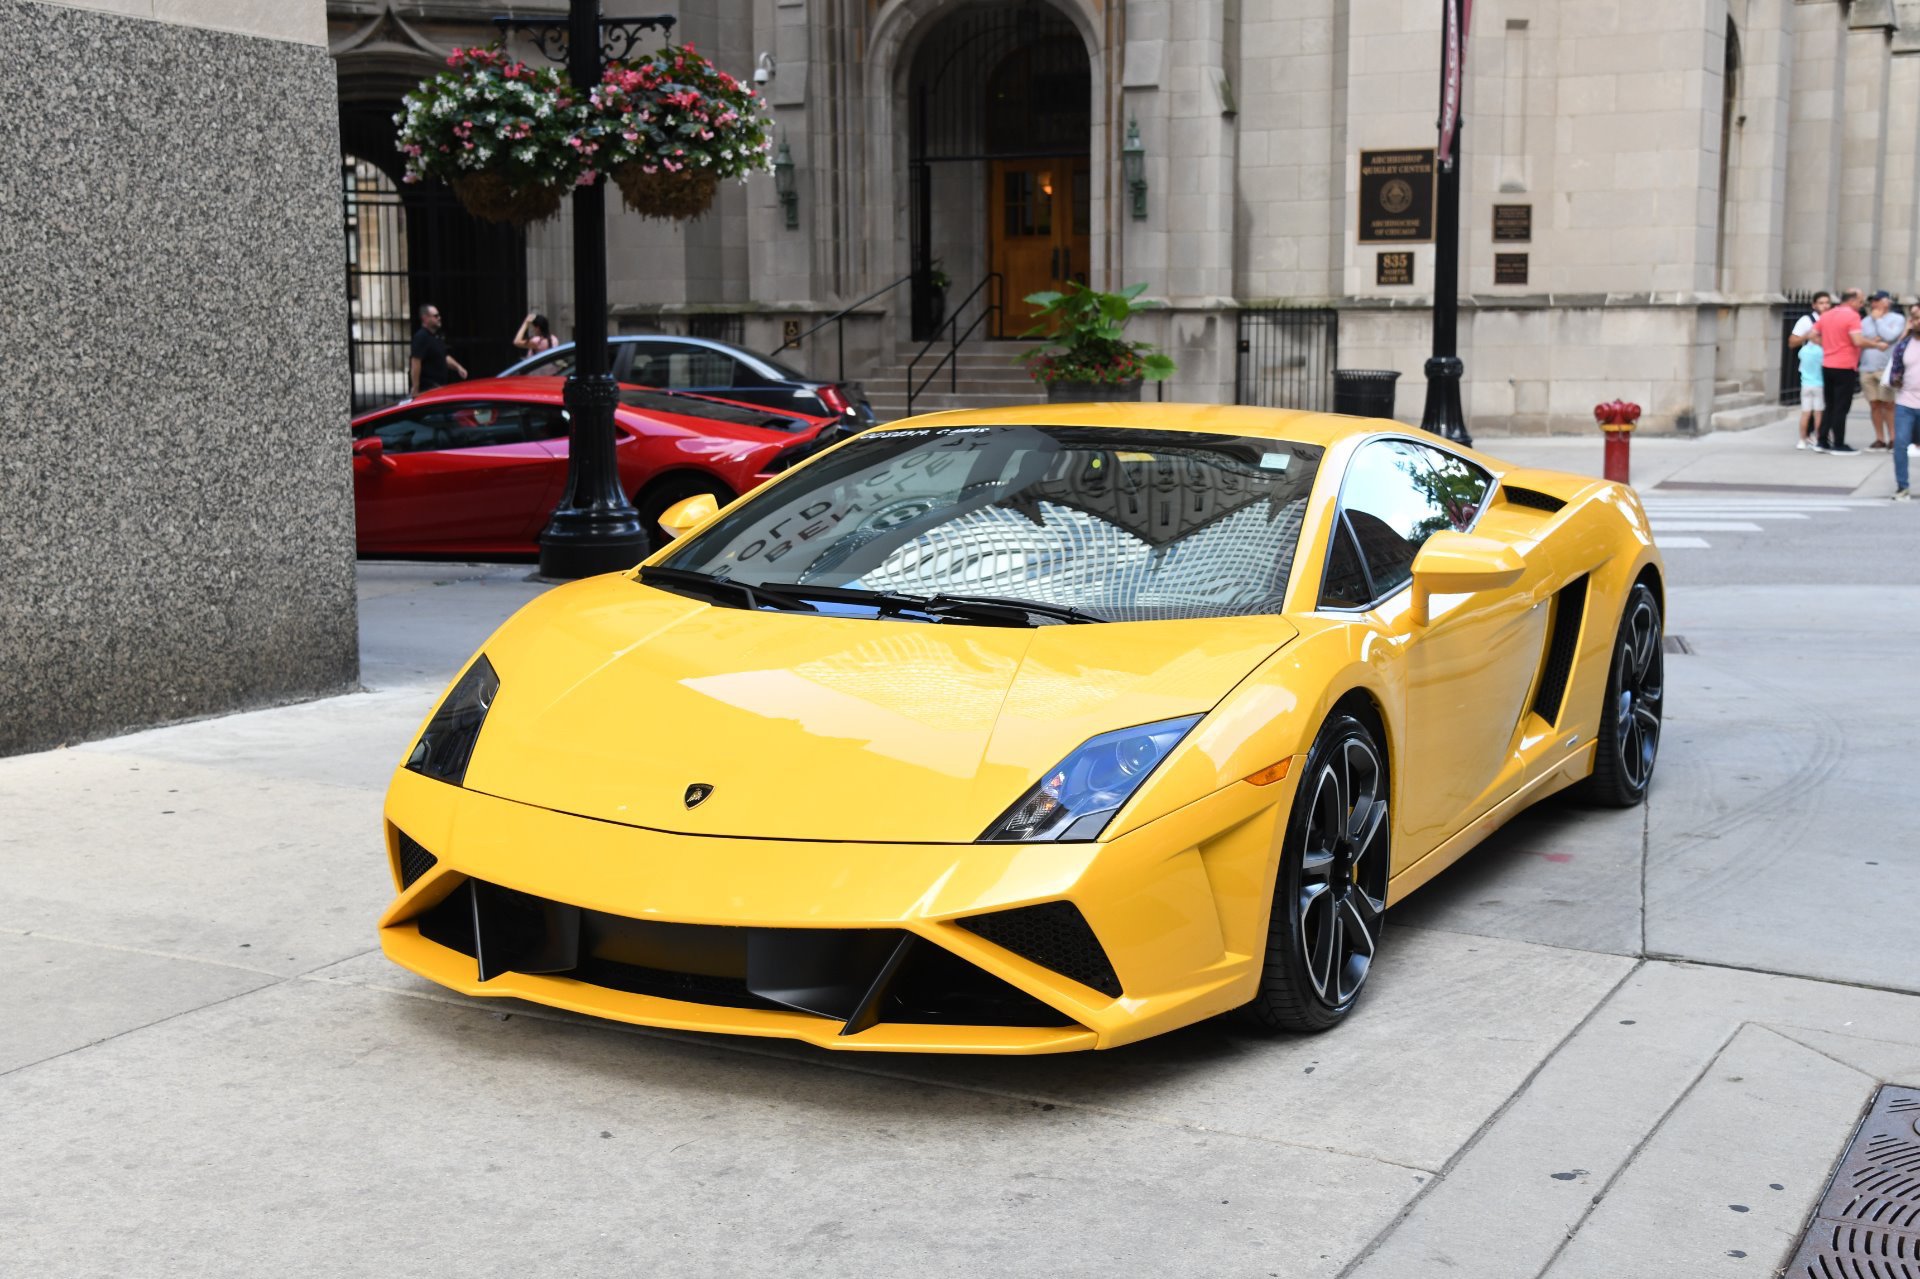 By 2013, the Gallardo had morphed into this